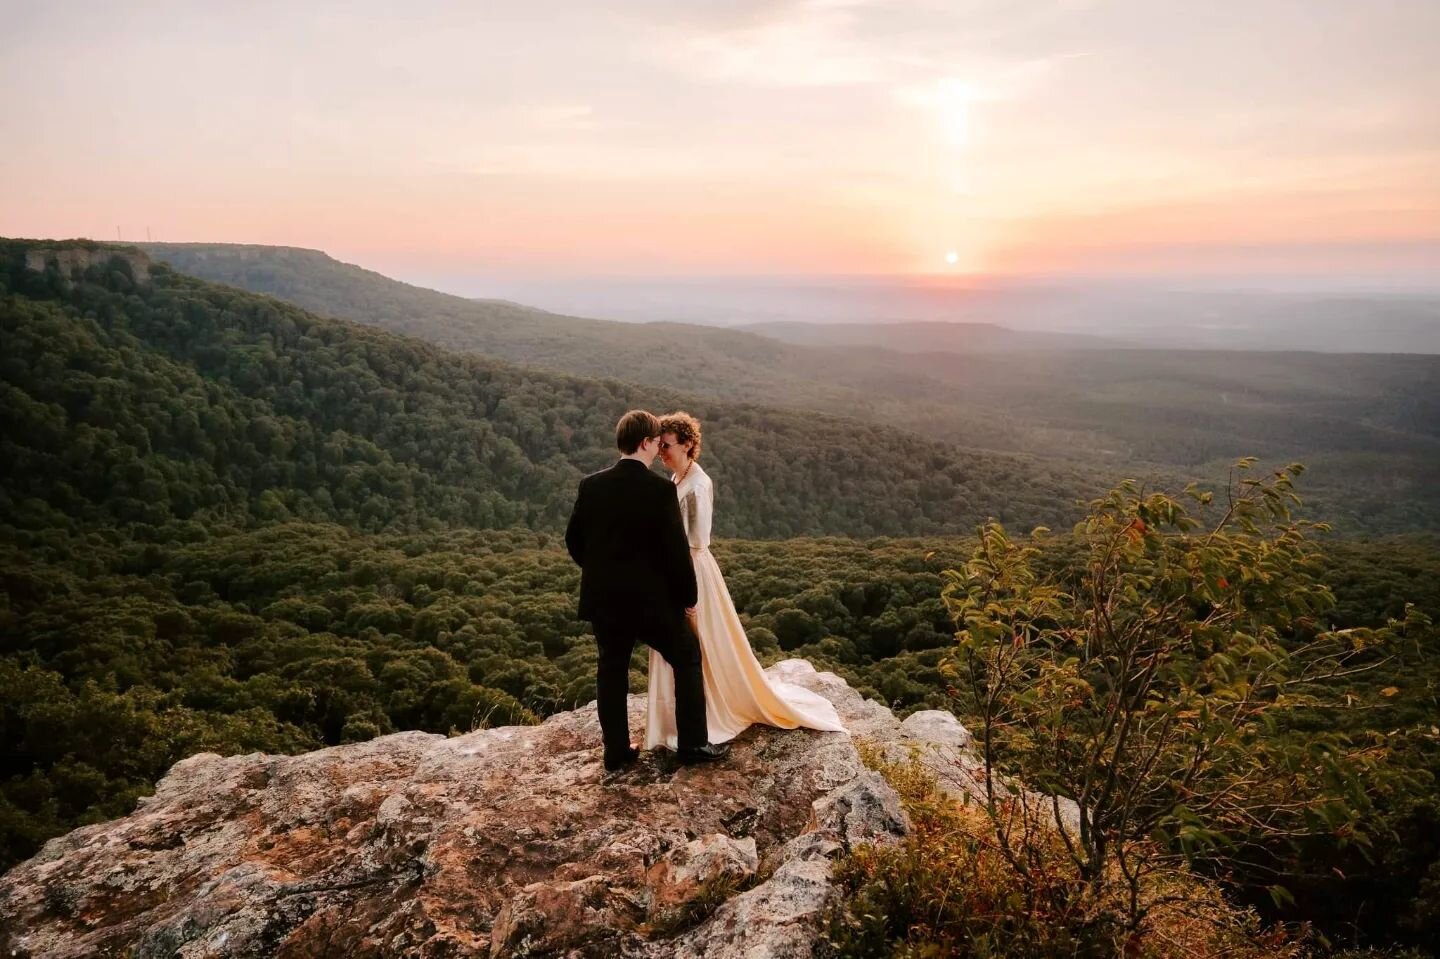 Went all the way to Mt Magazine in Arkansas to do photos for this sweet couple. #mtmagazine #arkansas #travelpgotographer #nmphotographer #coelopementphotographer #washingtonweddingphotographer #washingtonphotographer